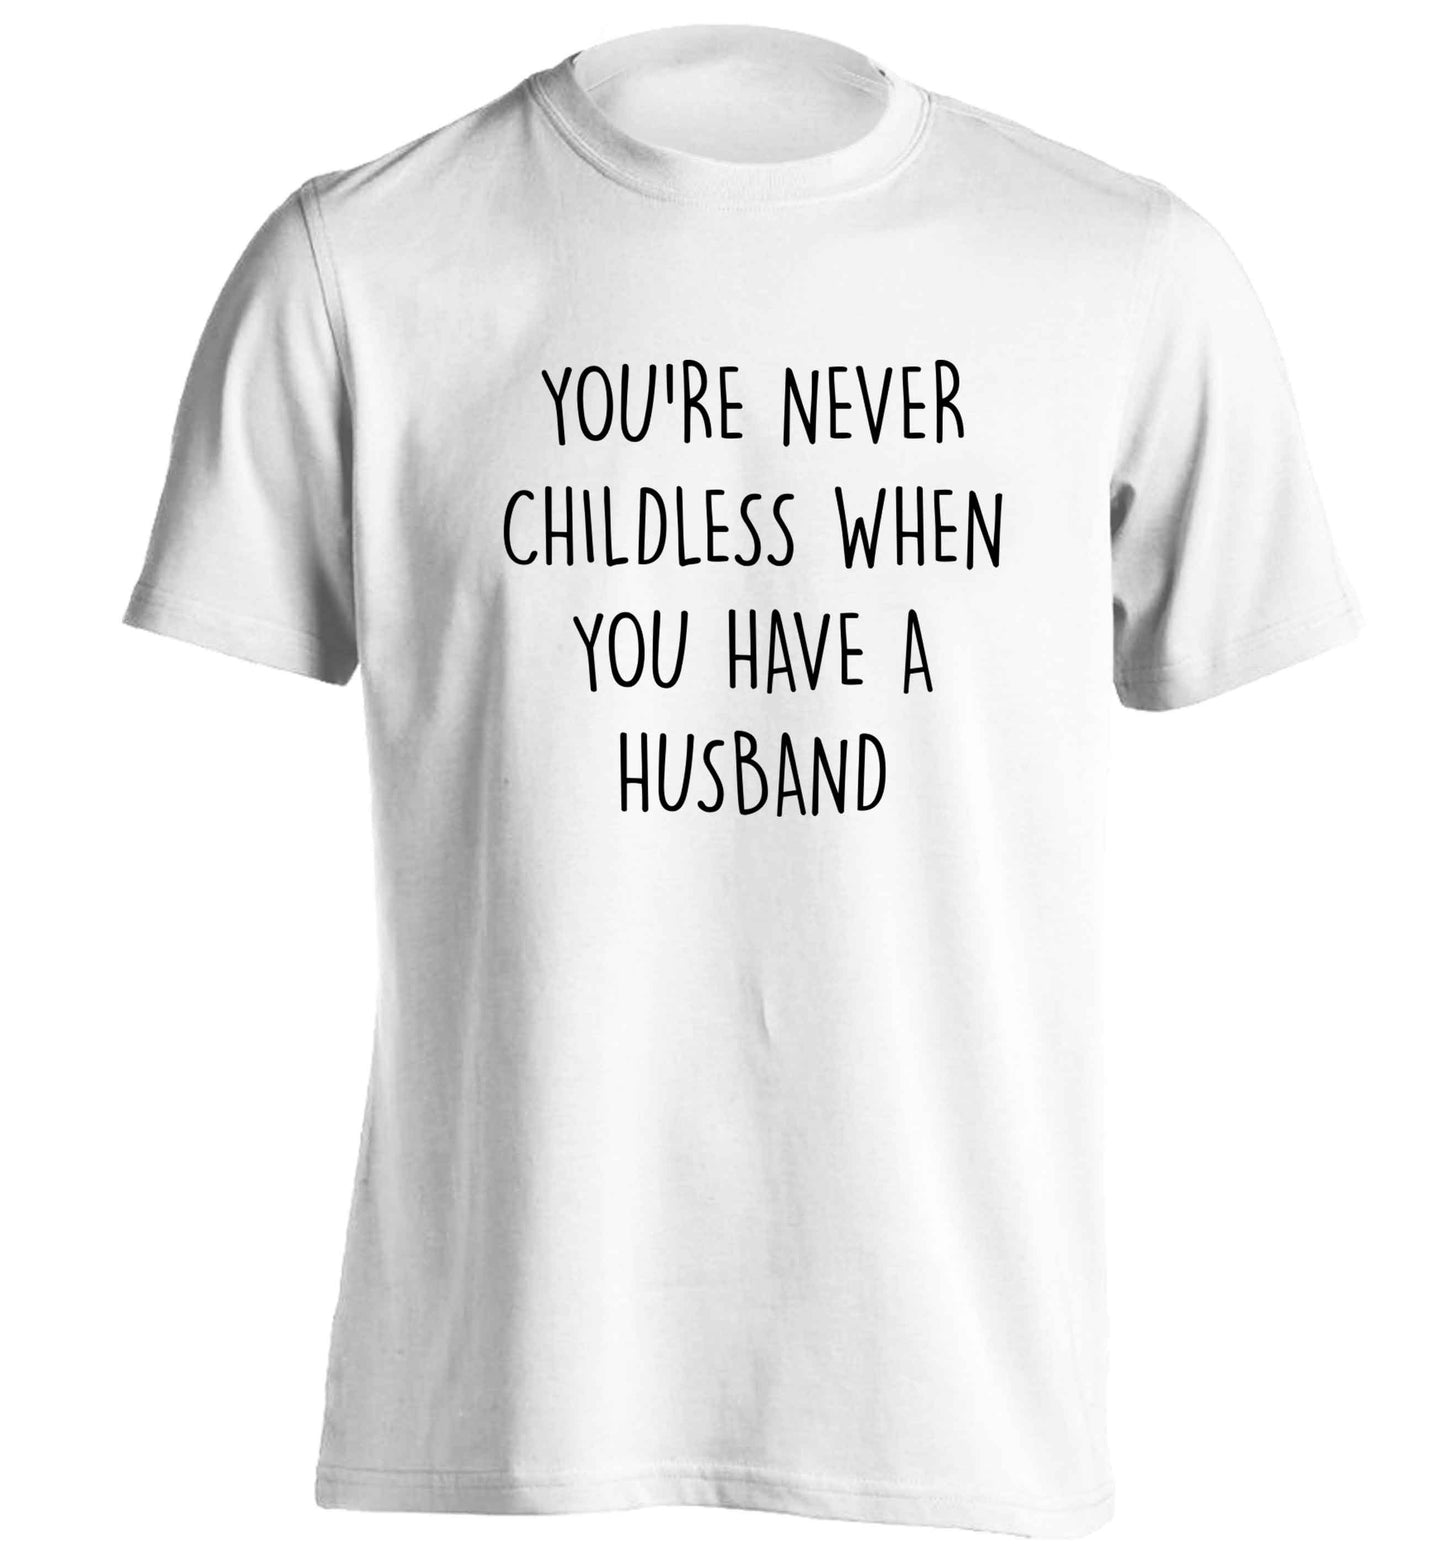 You're never childess when you have a husband adults unisex white Tshirt 2XL